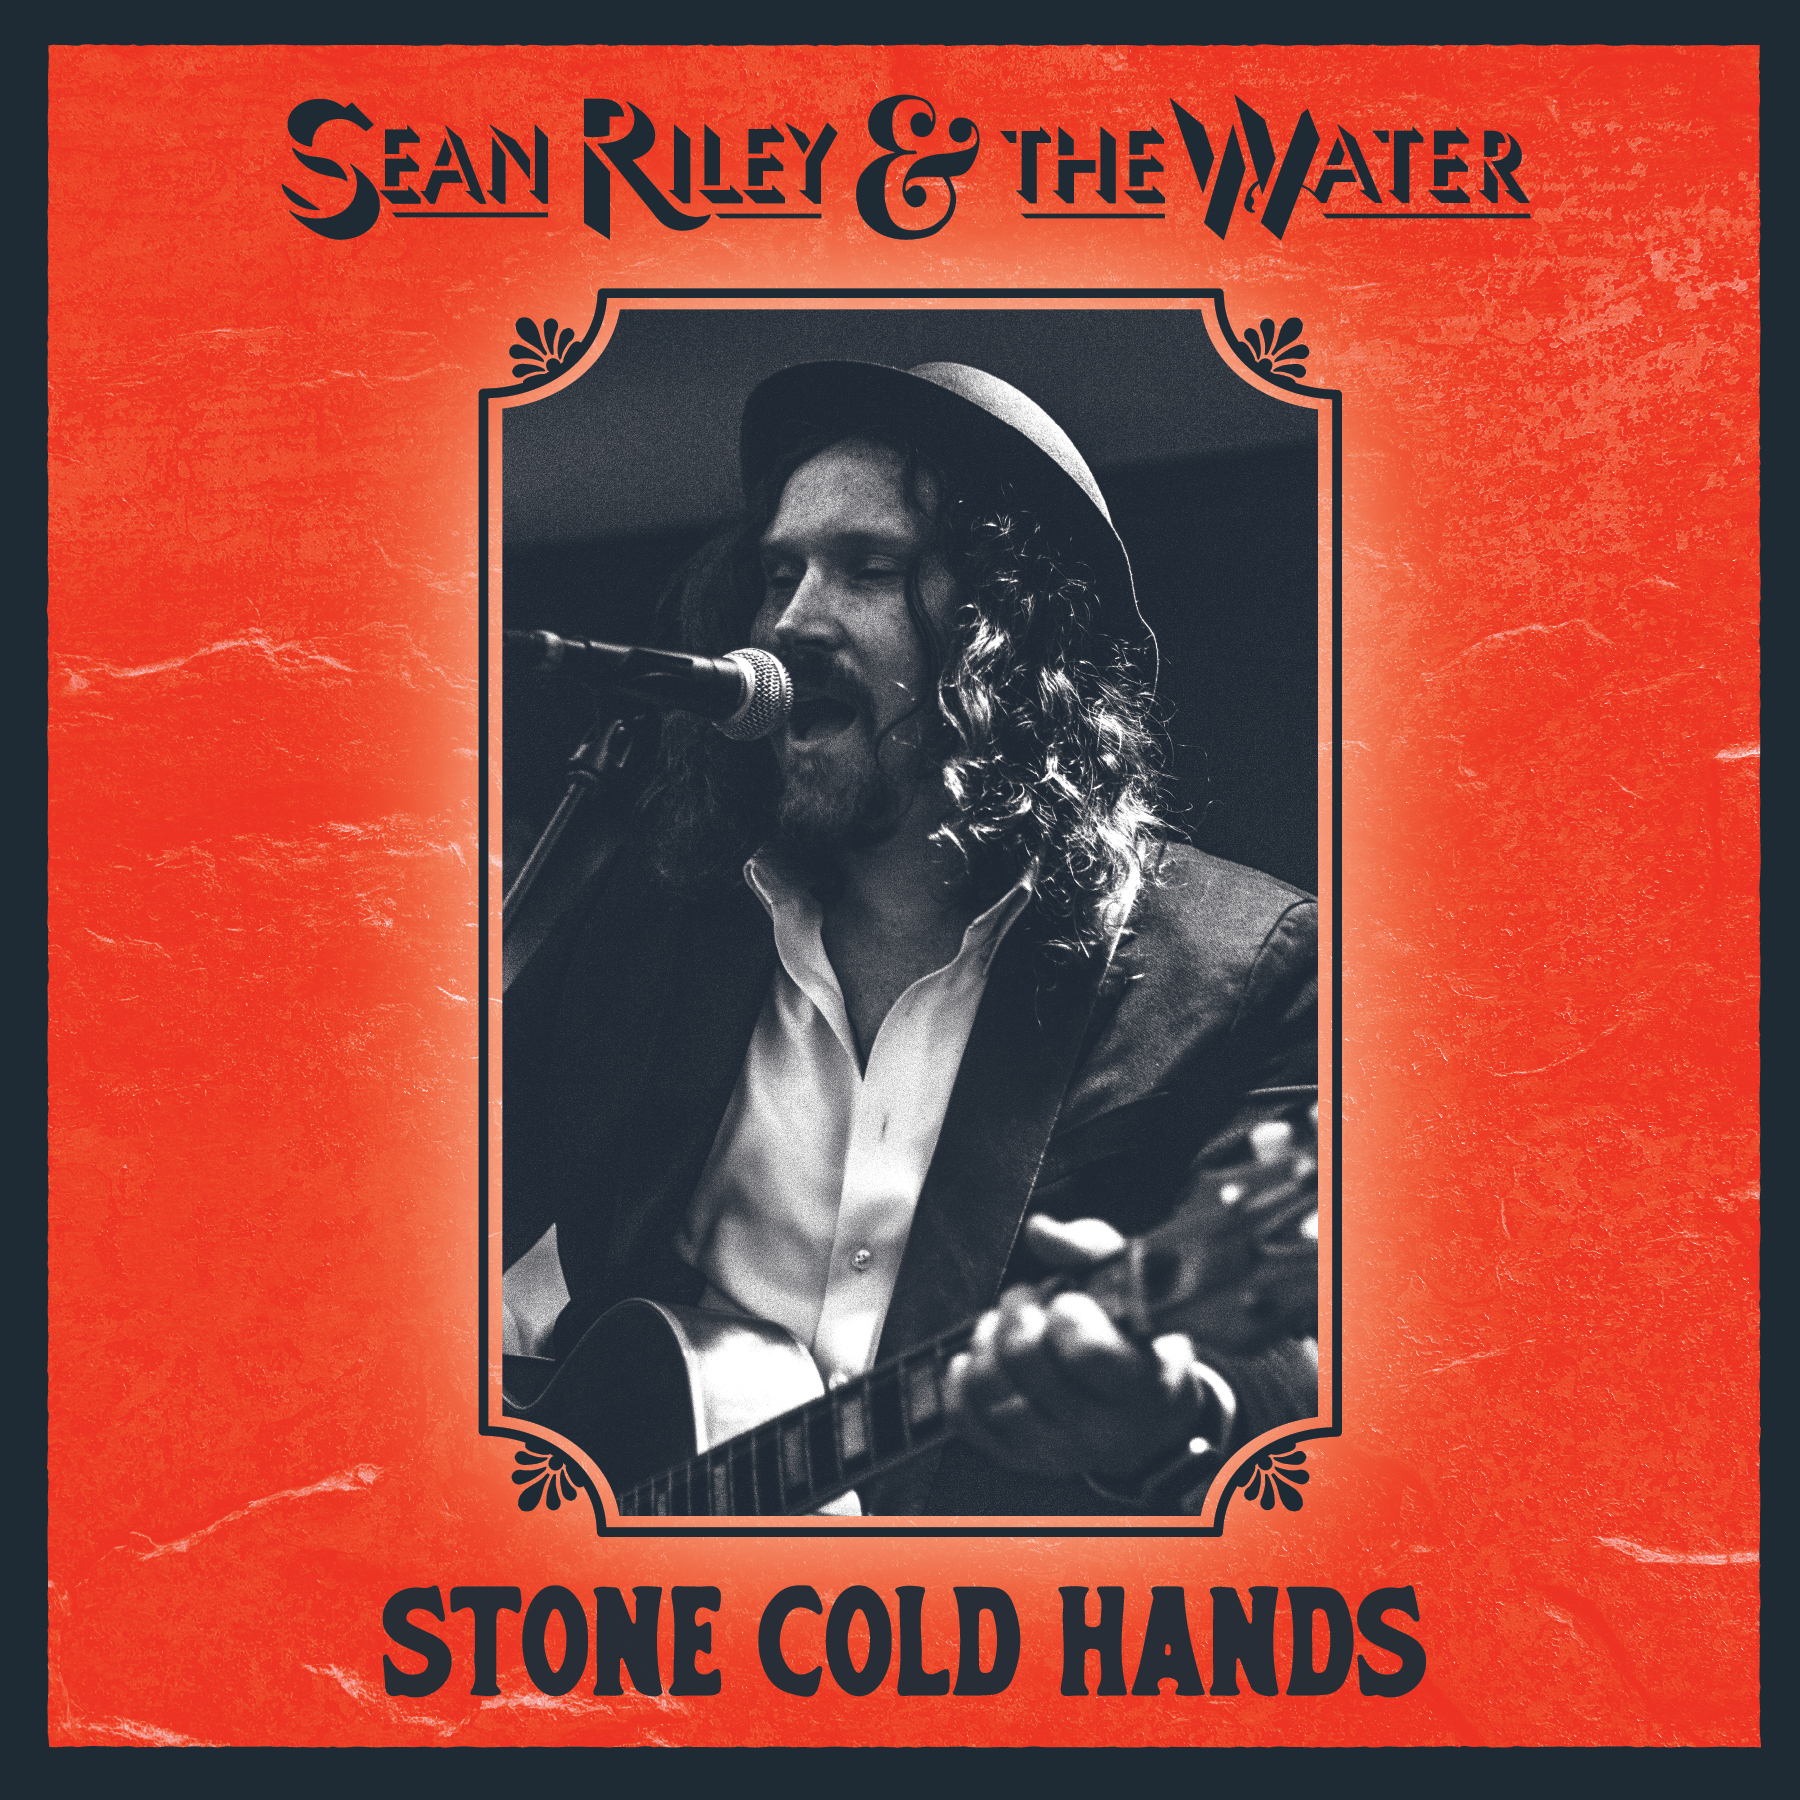 New Orleans Roots Music Wizard Sean Riley Brings Life to New Stone Cold Hands Album Out March 8th